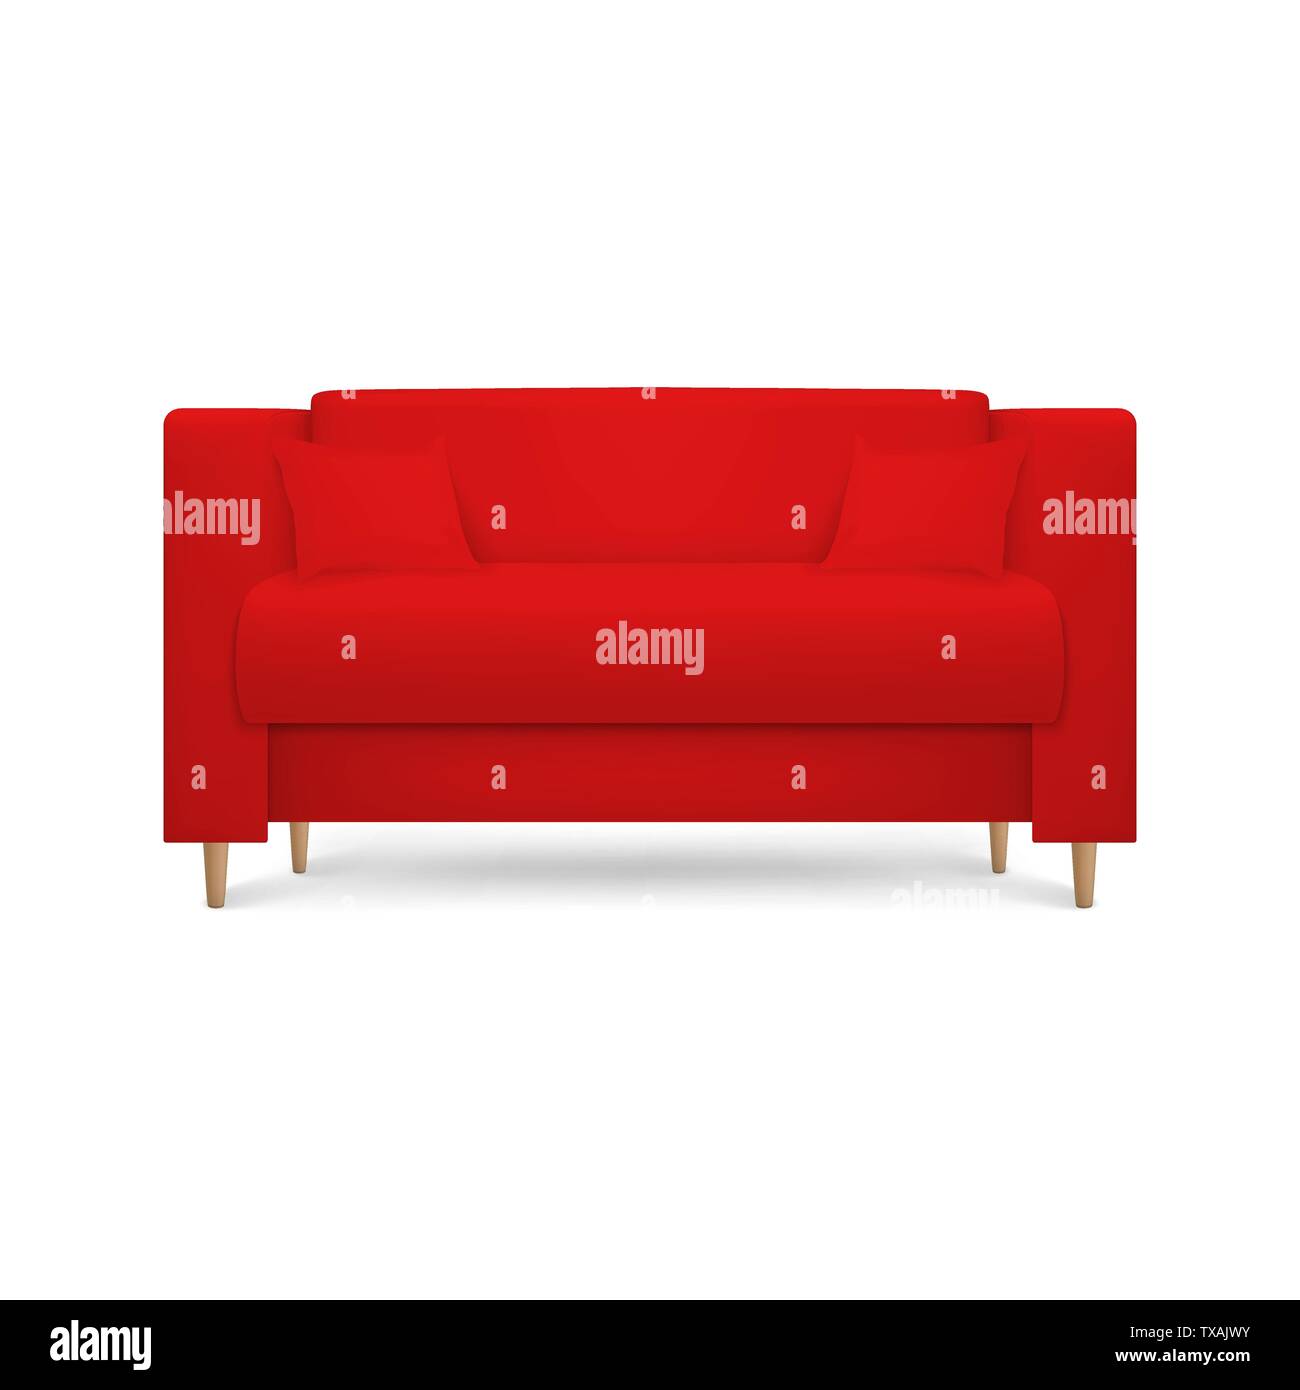 Vector 3d Realistic Render Red Leather Luxury Office Sofa, Couch with Pillows in Simple Modern Style for Interior Design, Living Room, Reception or Stock Vector